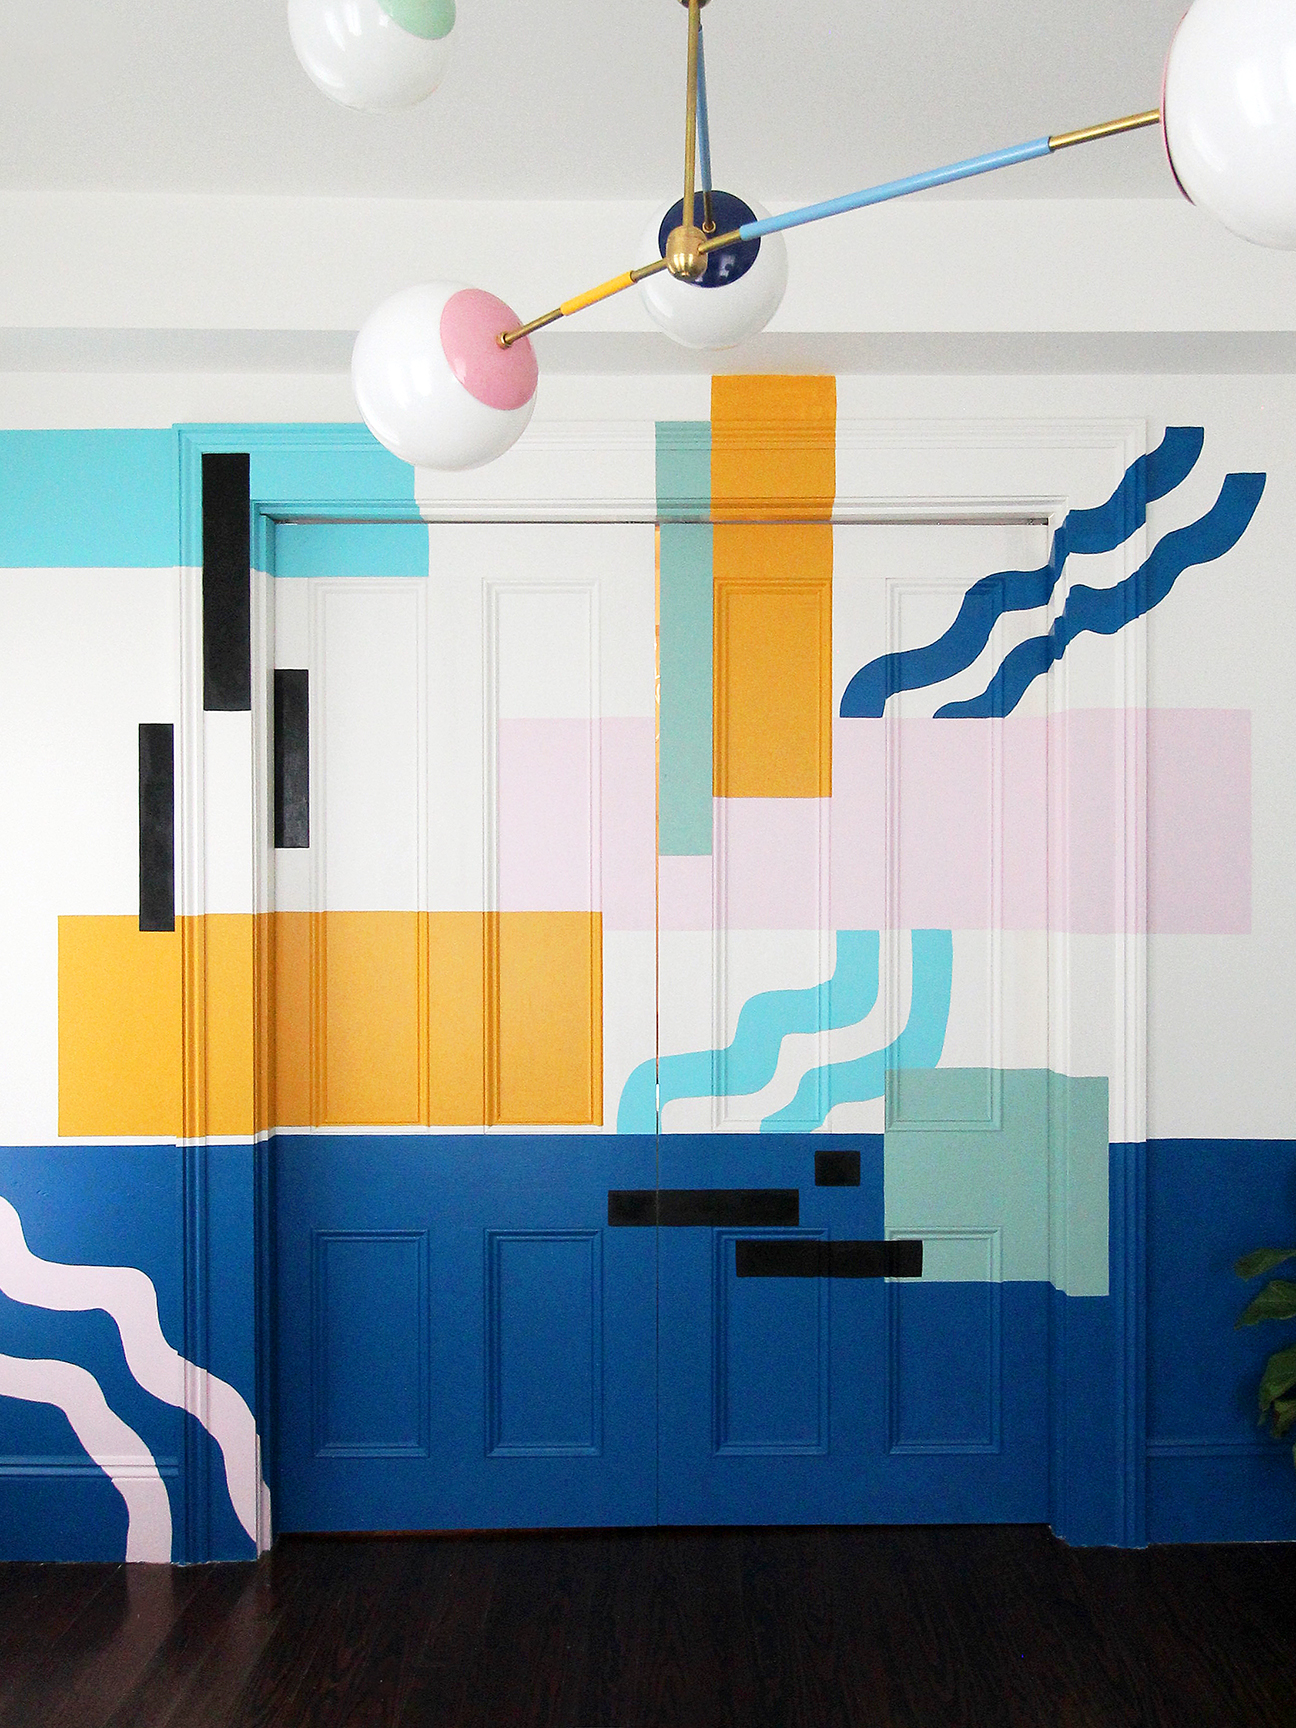 10 Wall Painting Design Ideas for the Free Spirit